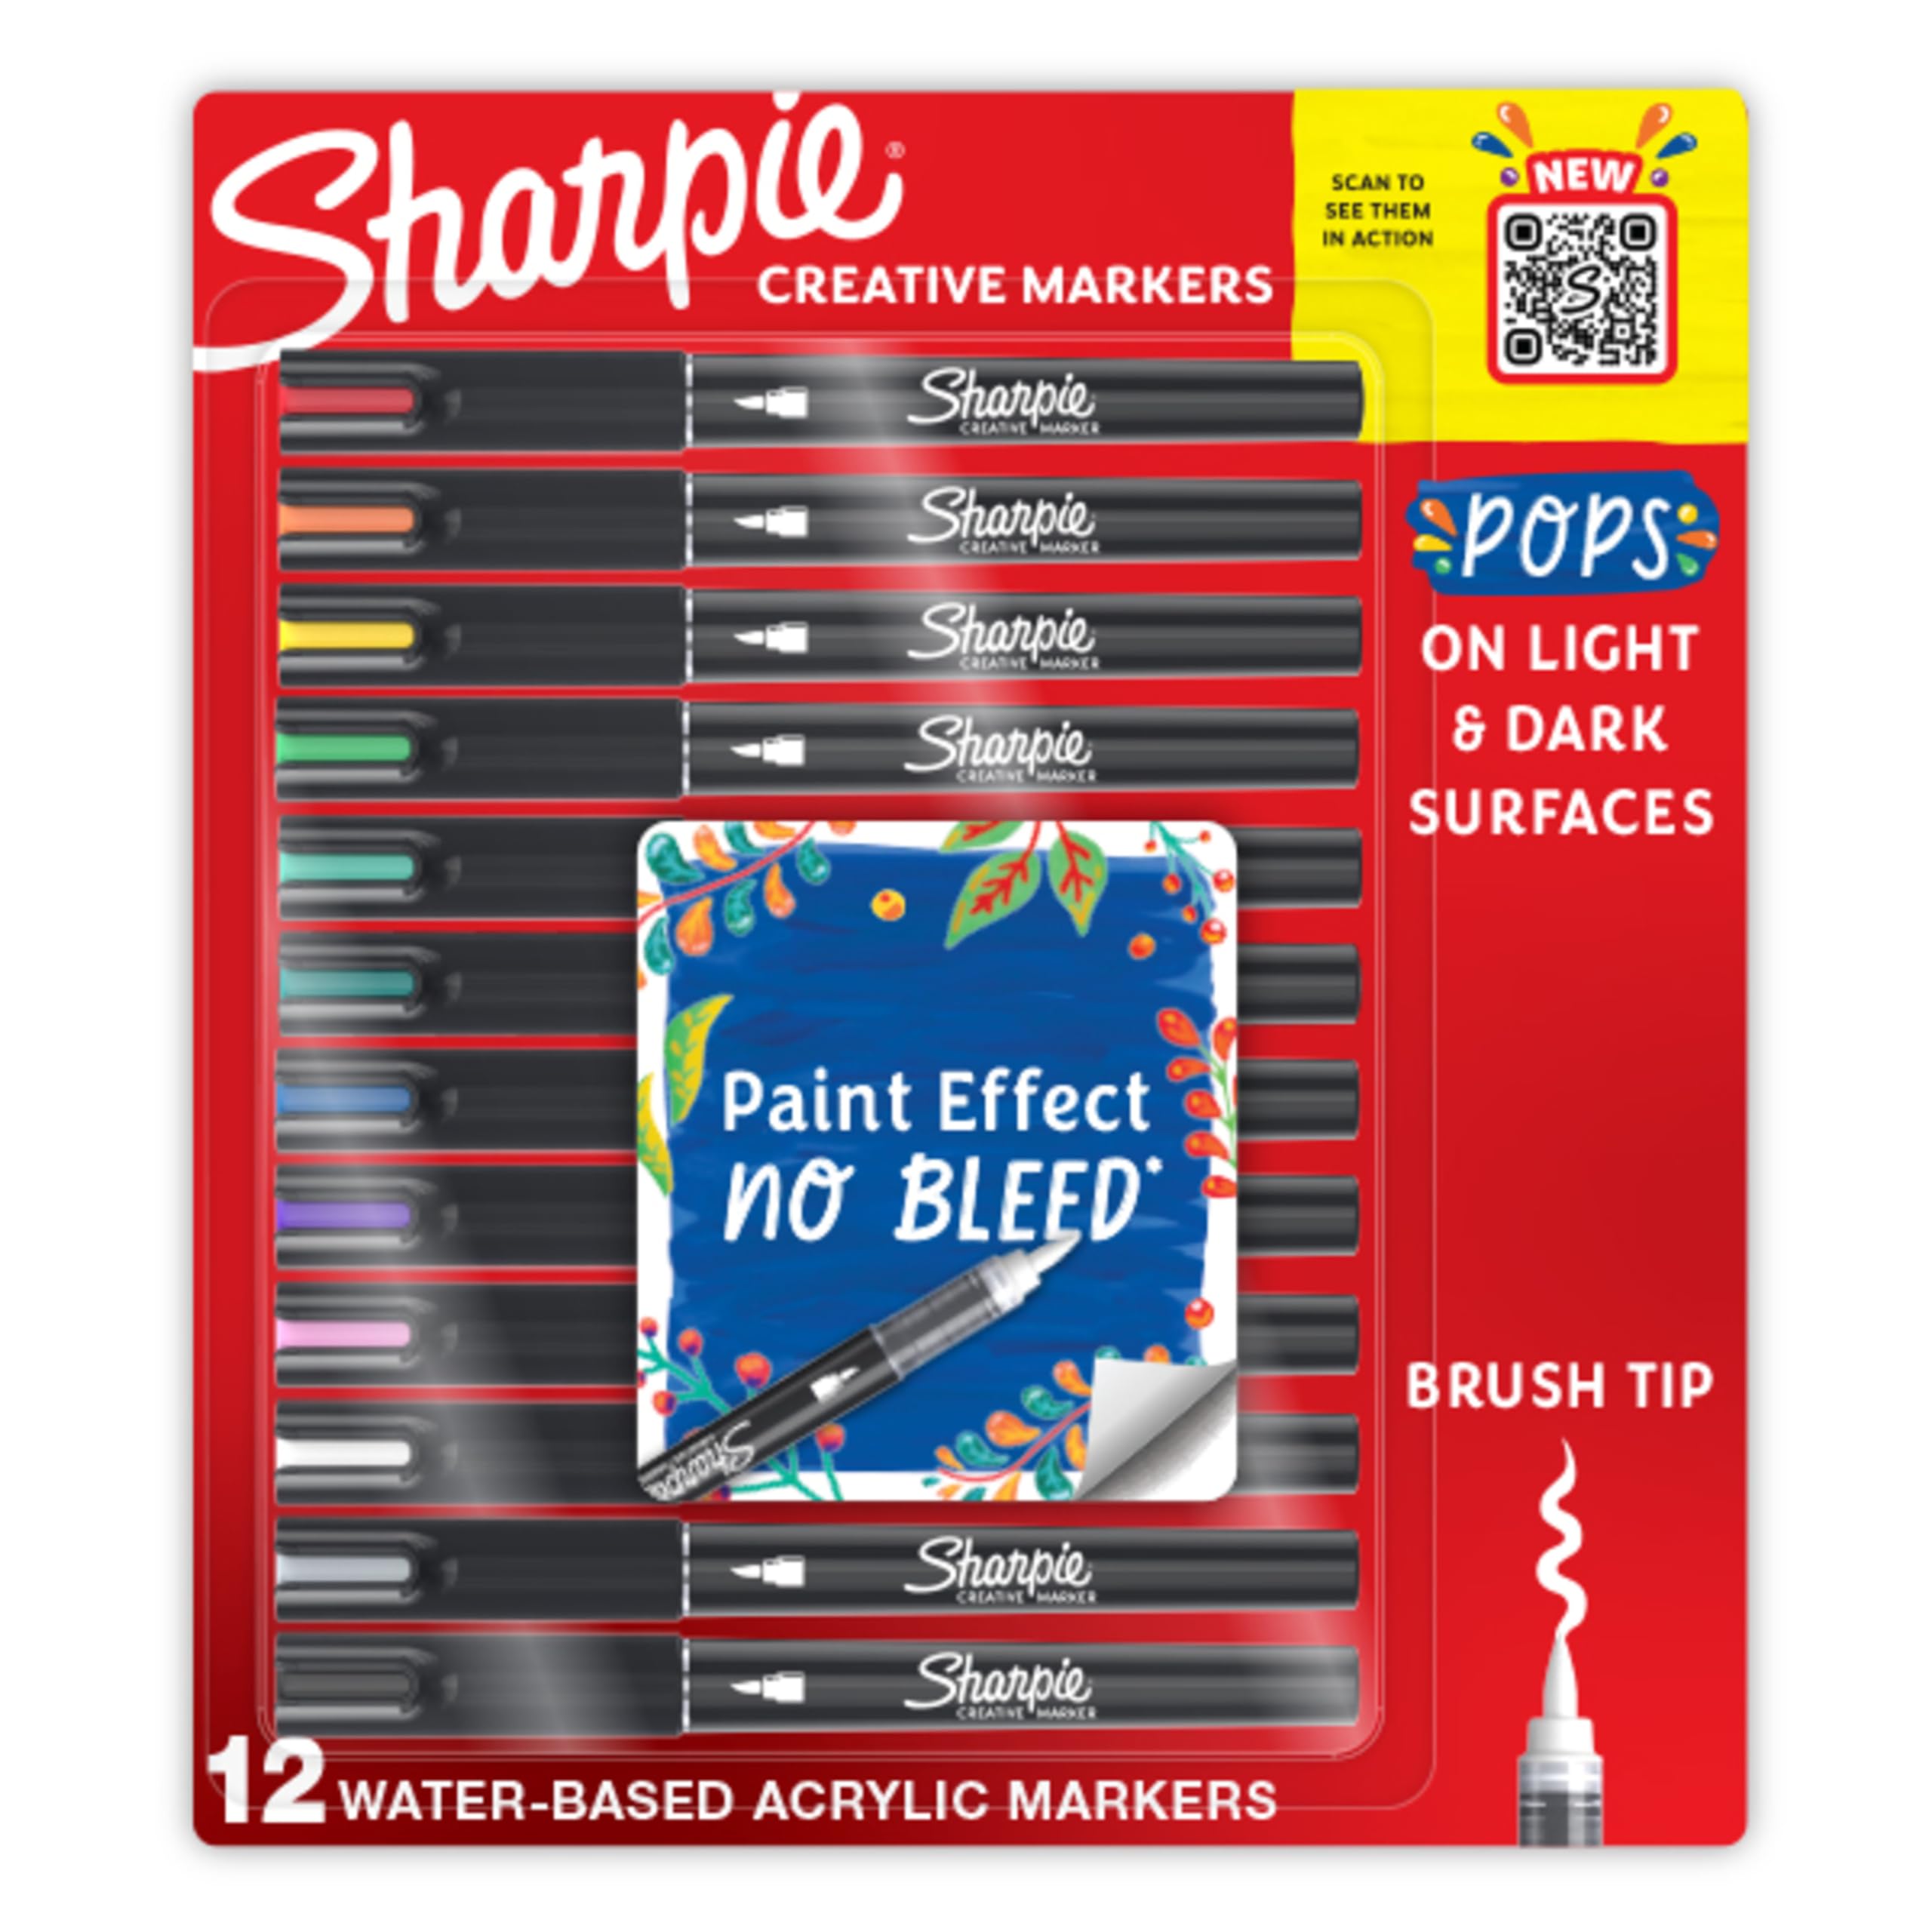 SHARPIE Creative Markers, Water-Based Acrylic Markers, Brush Tip, Assorted Colors, 12 Count